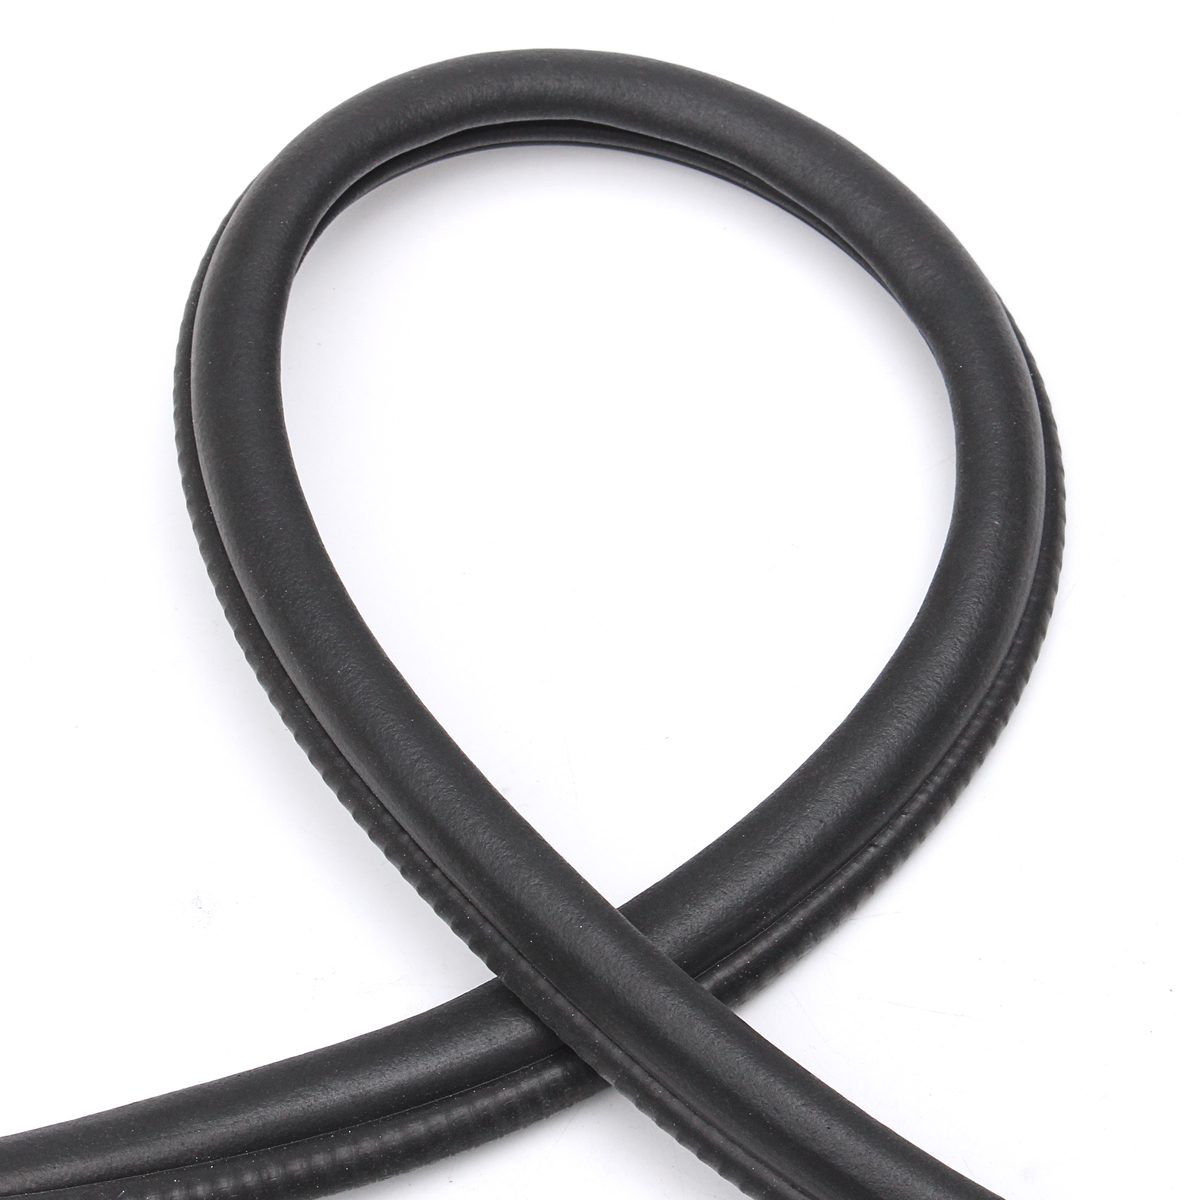 6M-Rubber-Seal-Ring-Strip-Protector-B-Type-for-Door-Window-Trunk-Edge-1161222-5